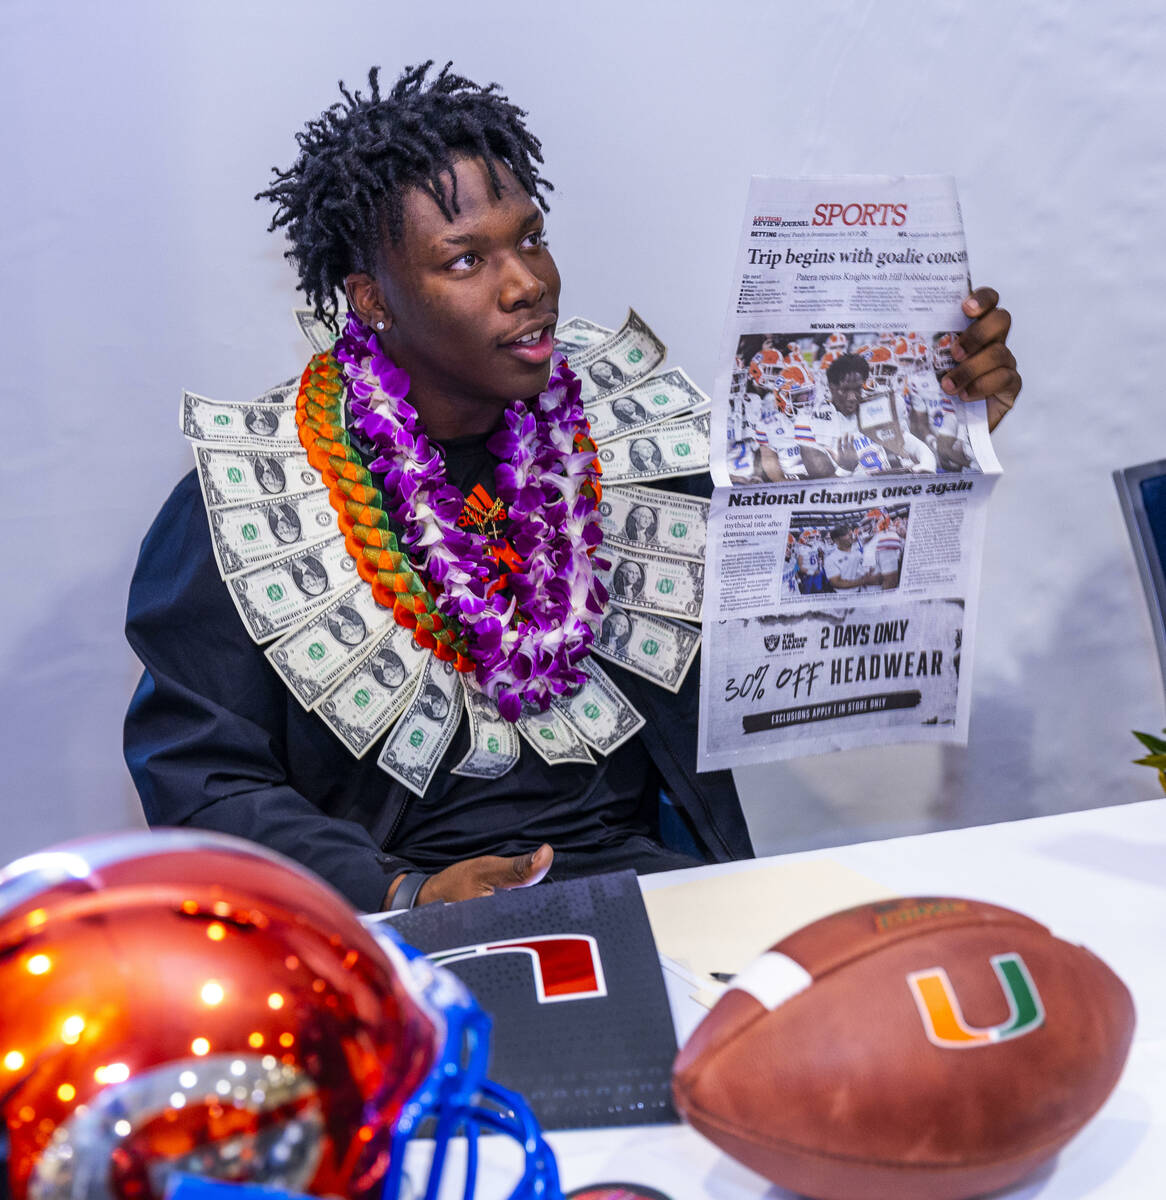 Bishop Gorman player Elija Lofton with a commitment letter to the University of Miami holds up ...